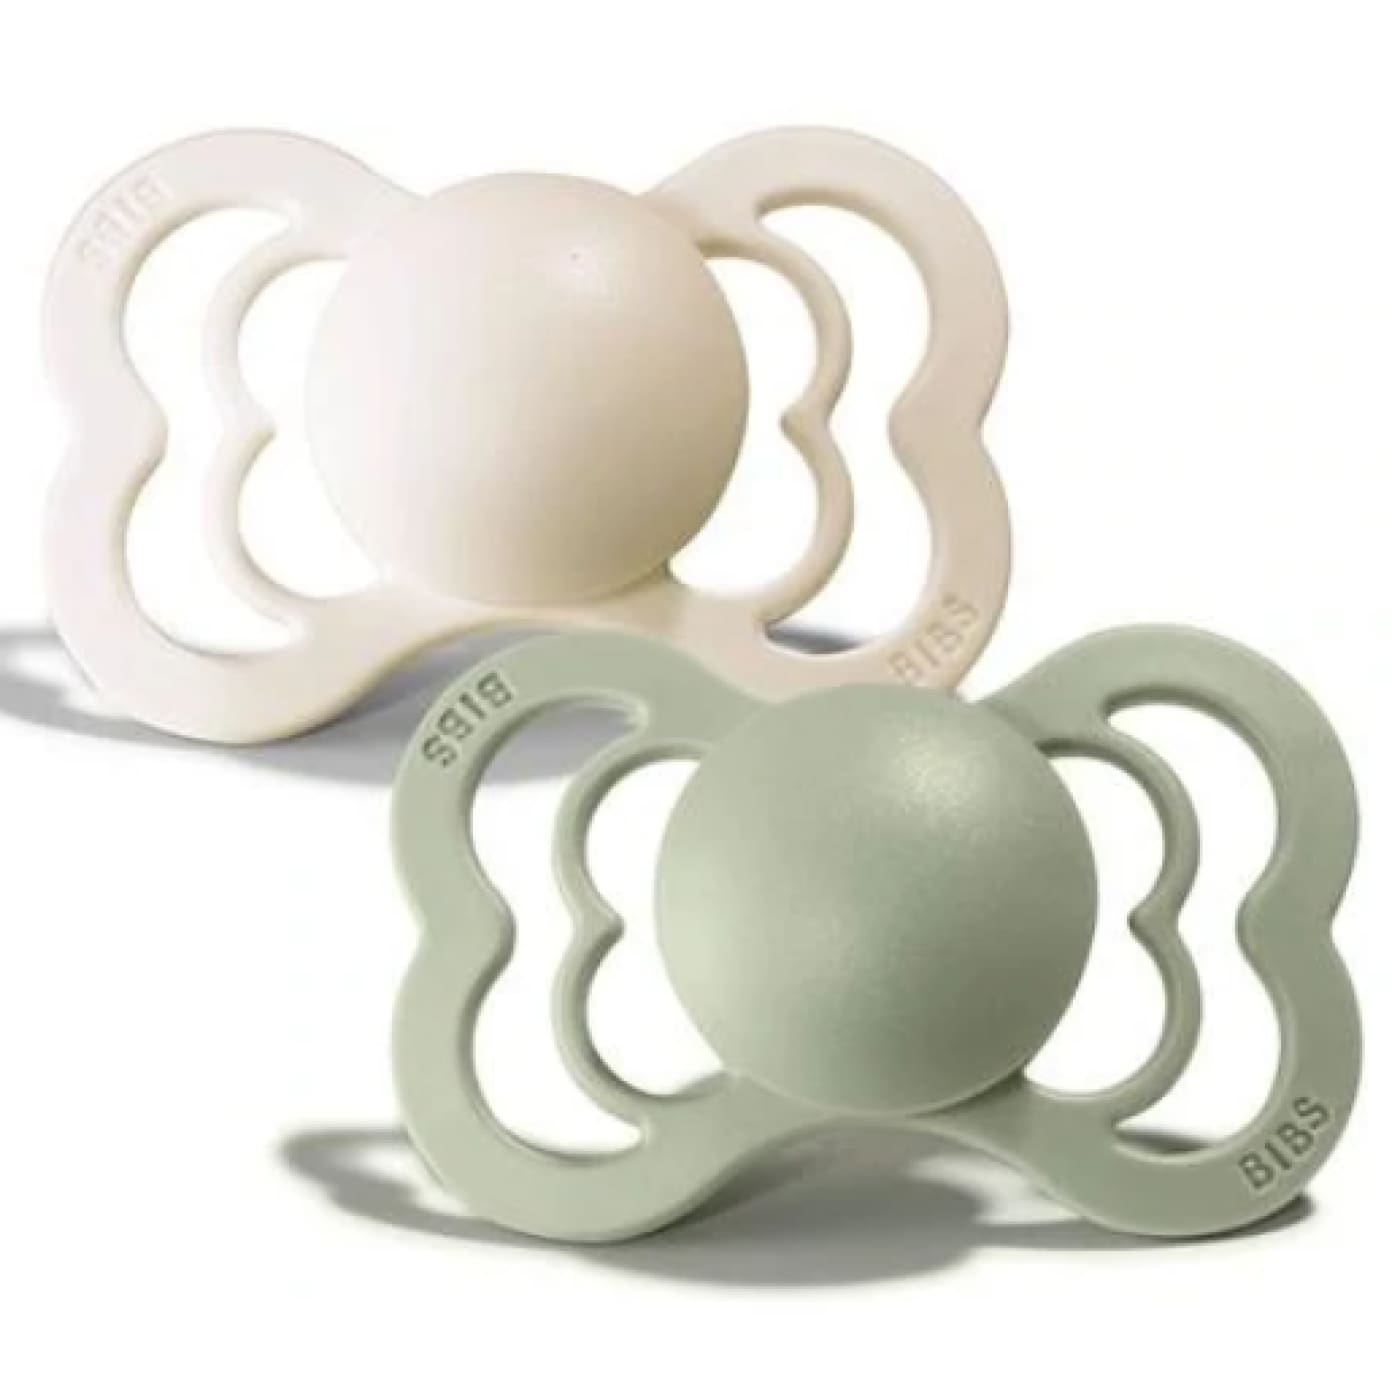 BIBS Dummy Twin Pack Couture Silicone Size One - Ivory/Sage - One / Ivory/Sage - NURSING & FEEDING - DUMMIES/SOOTHERS